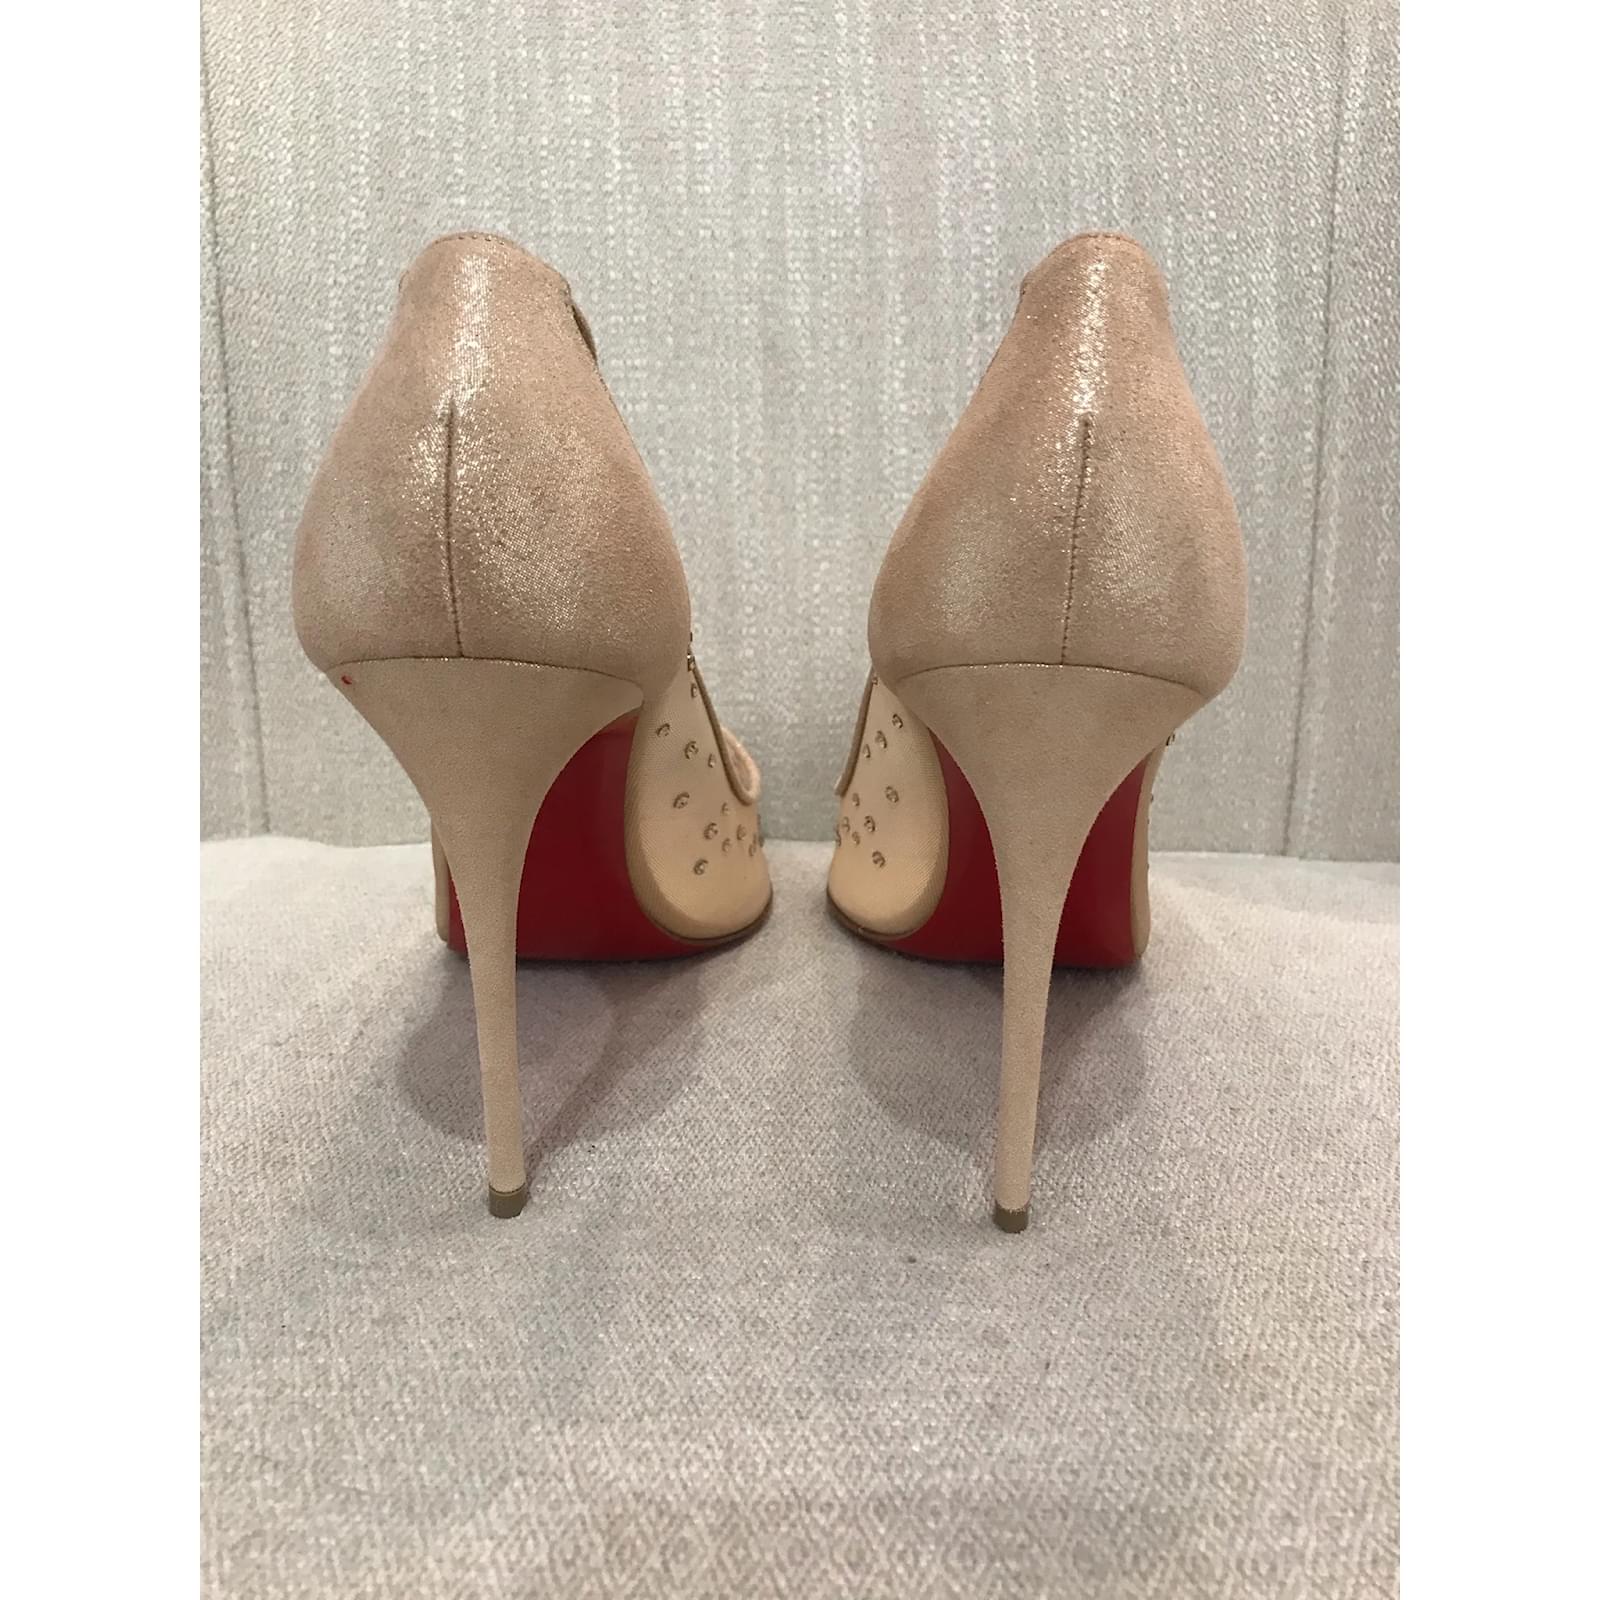 Christian Louboutin Beige/Silver Mesh and Leather Follies Strass Pumps Size  39.5 Christian Louboutin